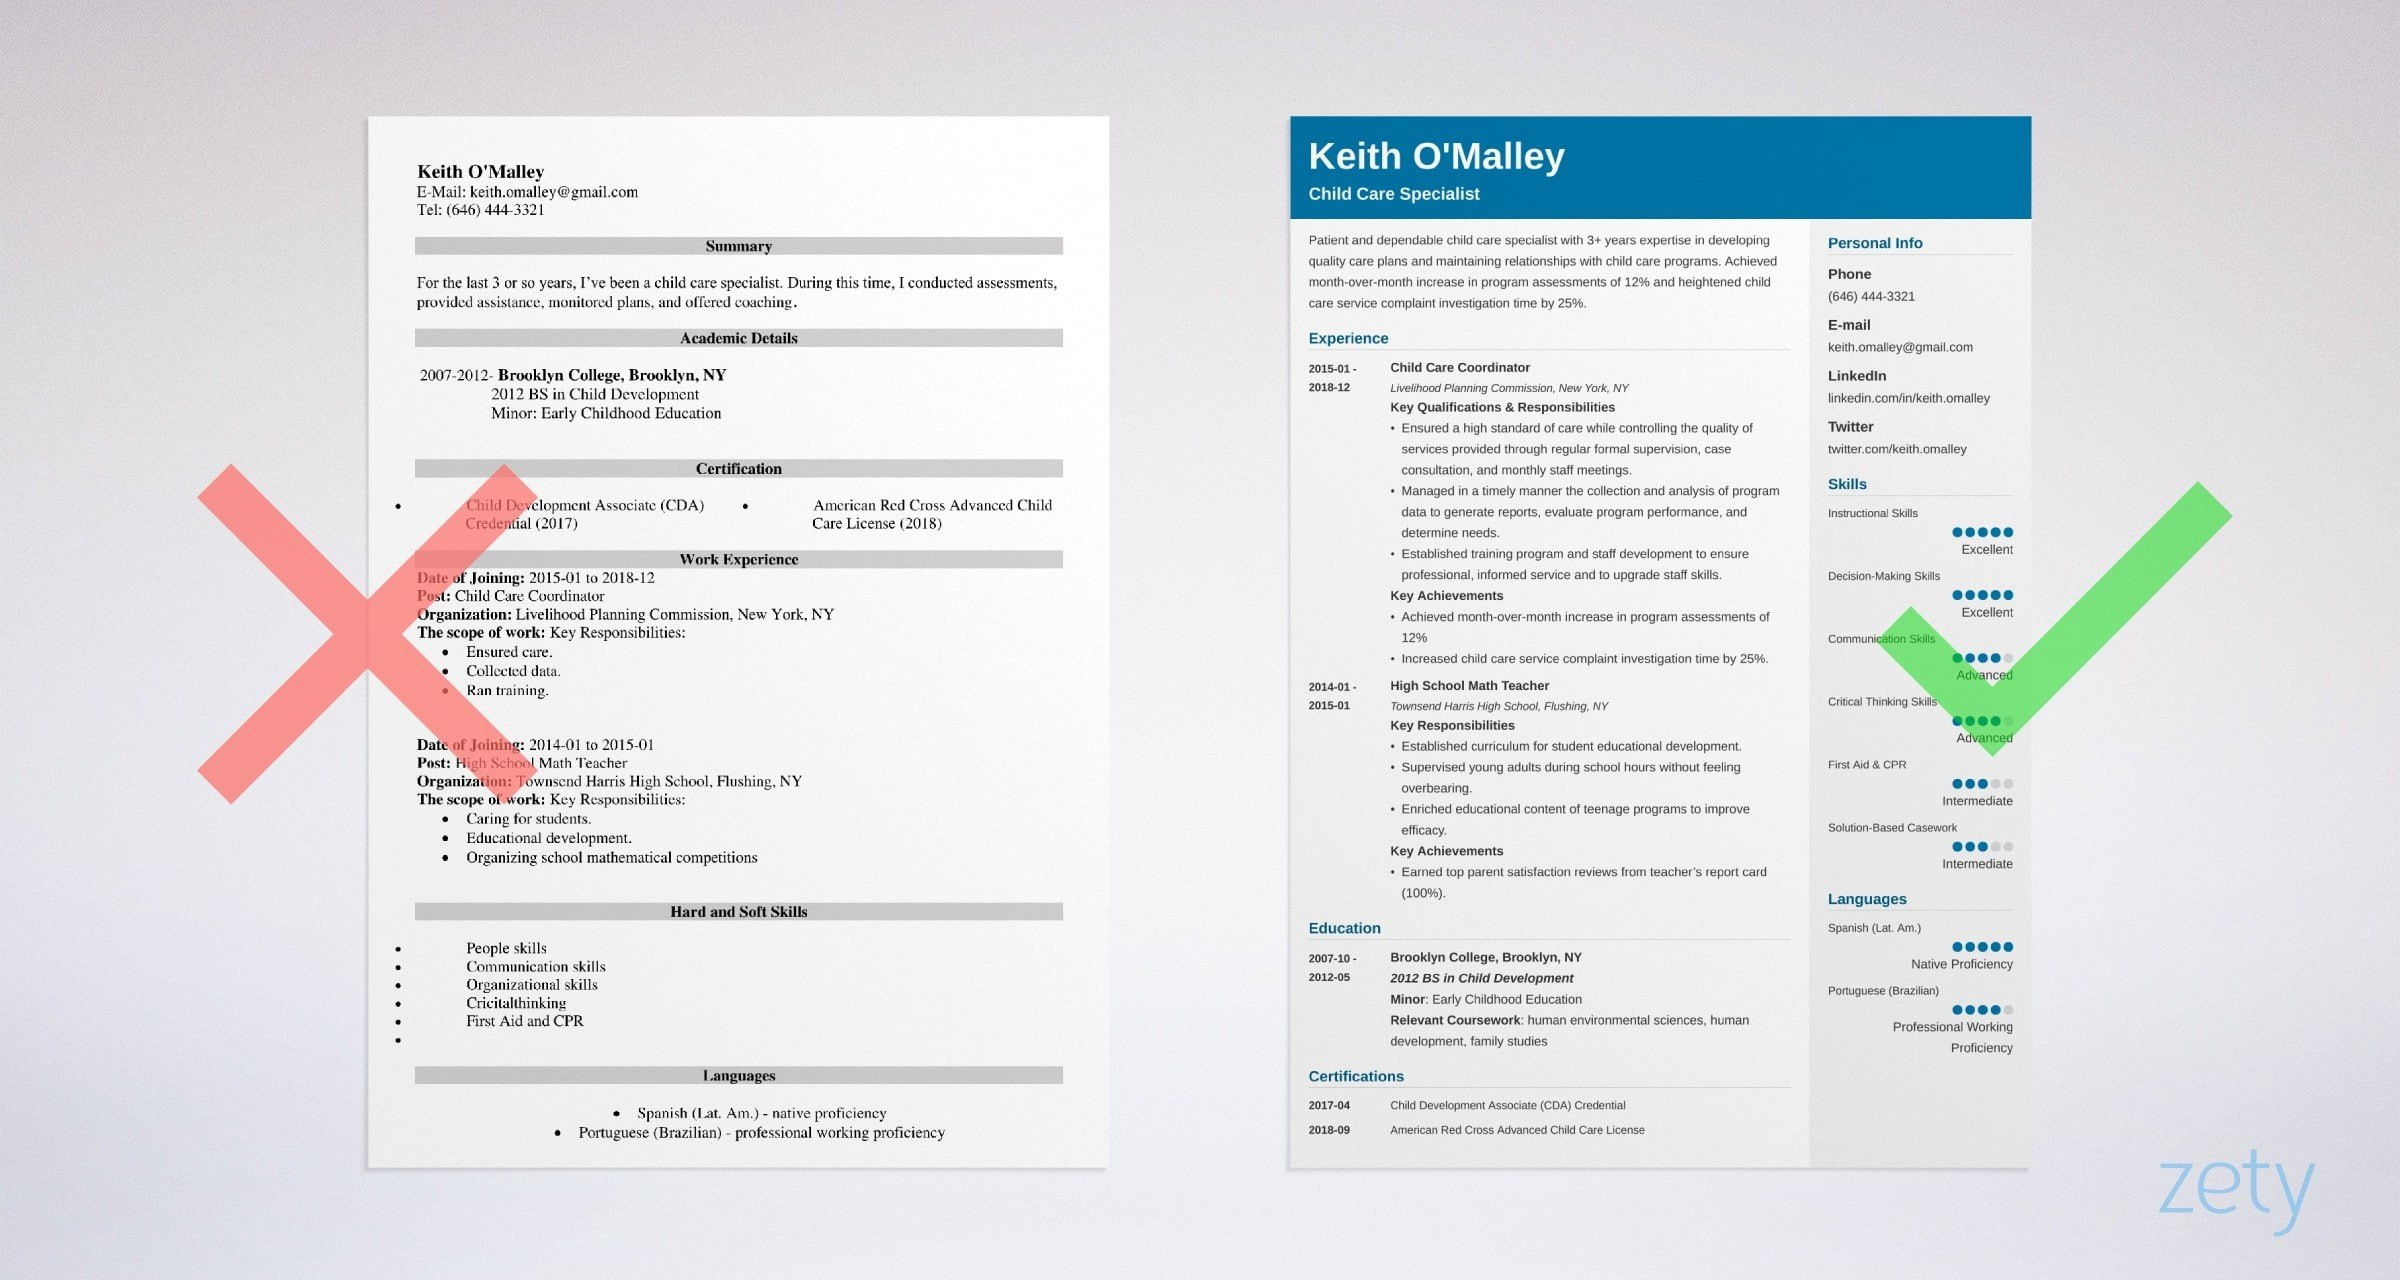 Child and Youth Care Resume Samples Child Care Provider Resume Example [with Skills & Objectives]